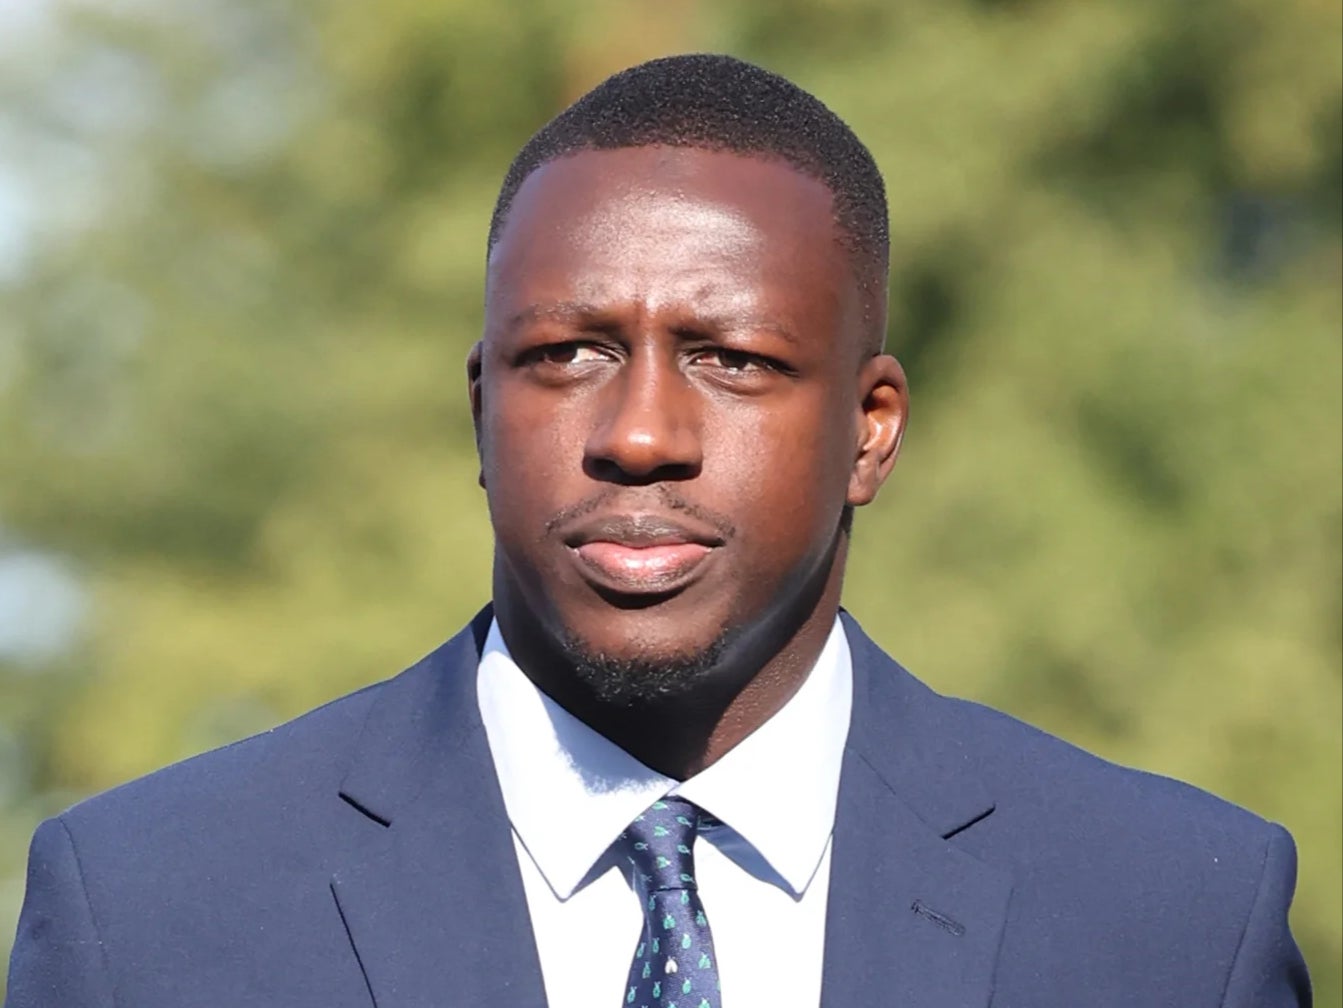 Man City footballer Benjamin Mendy denies seven counts of rape, one count of attempted rape and one count of sexual assault against six young women